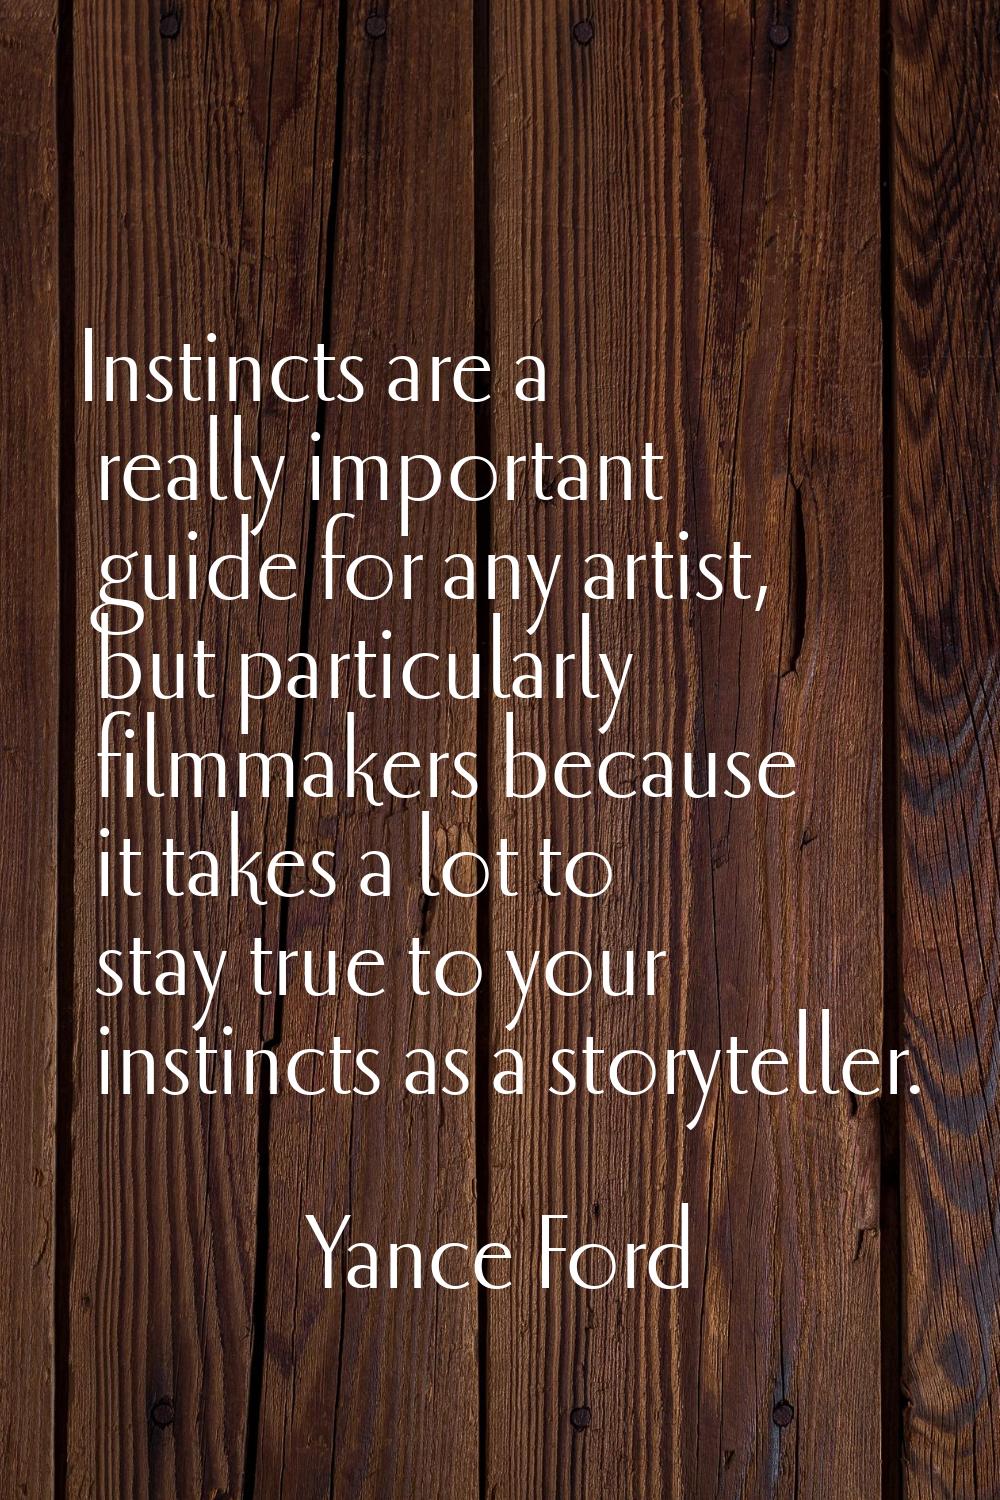 Instincts are a really important guide for any artist, but particularly filmmakers because it takes